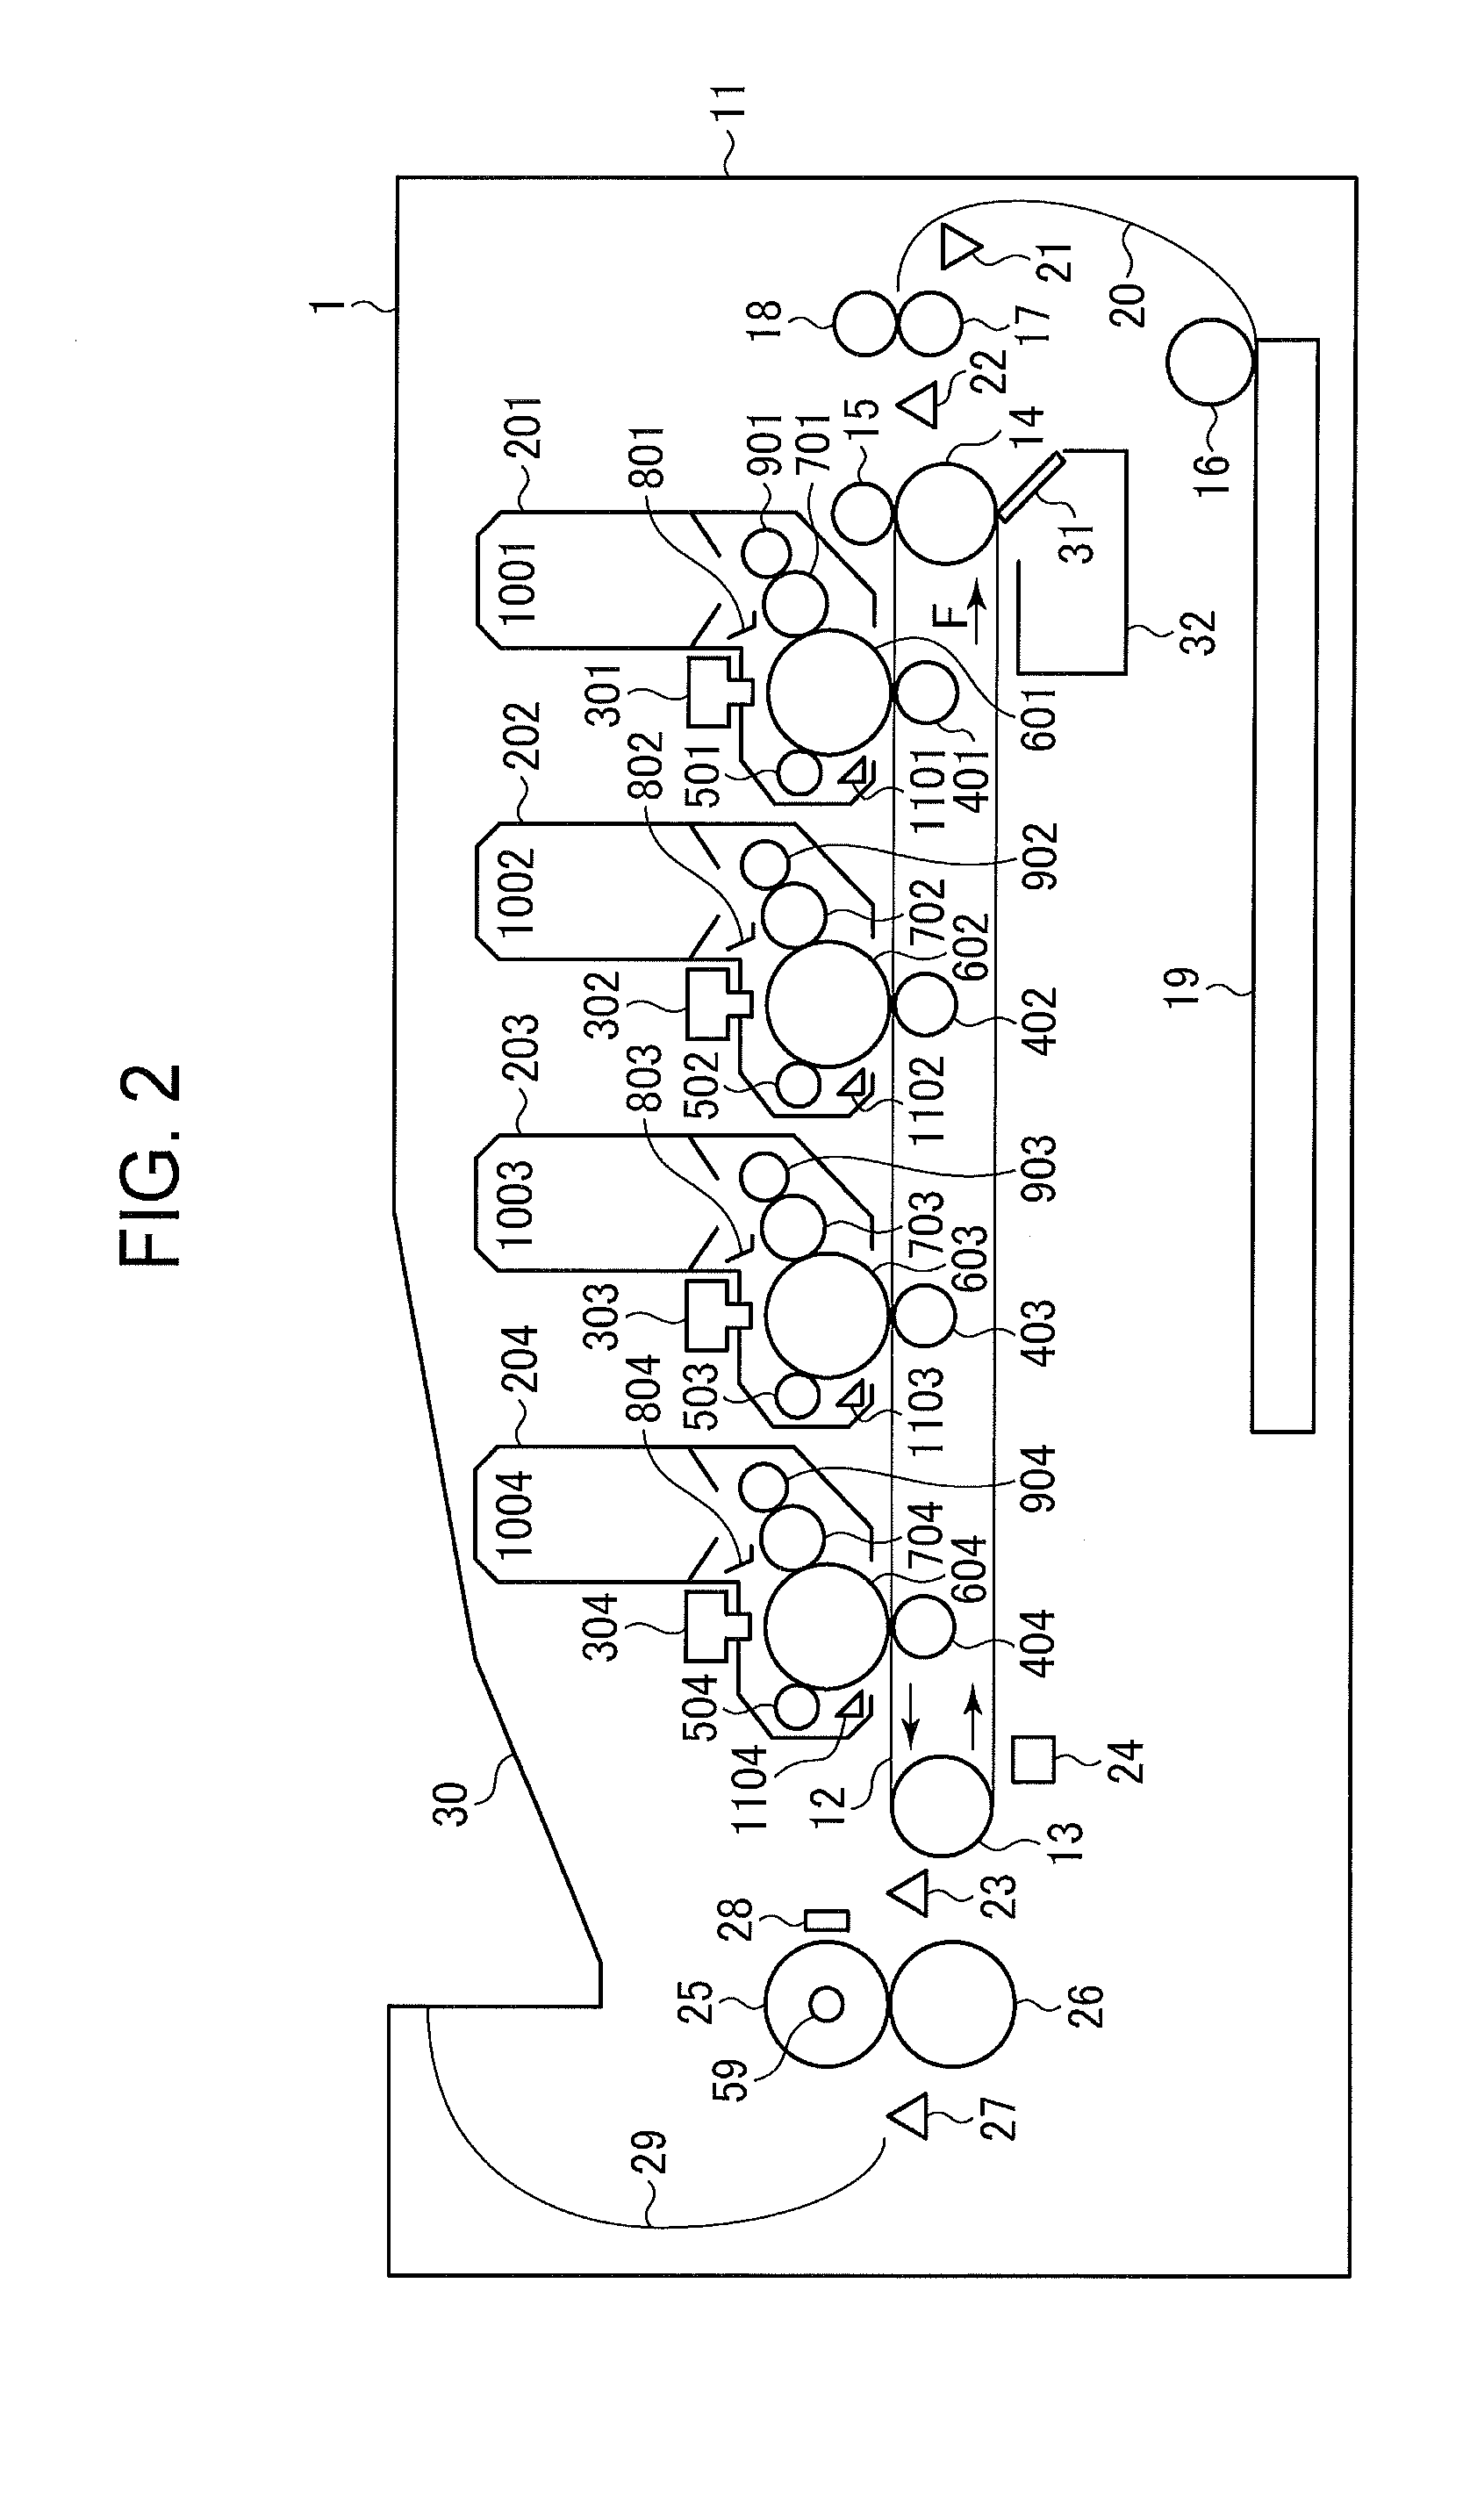 Image forming apparatus and method of controlling the image forming apparatus